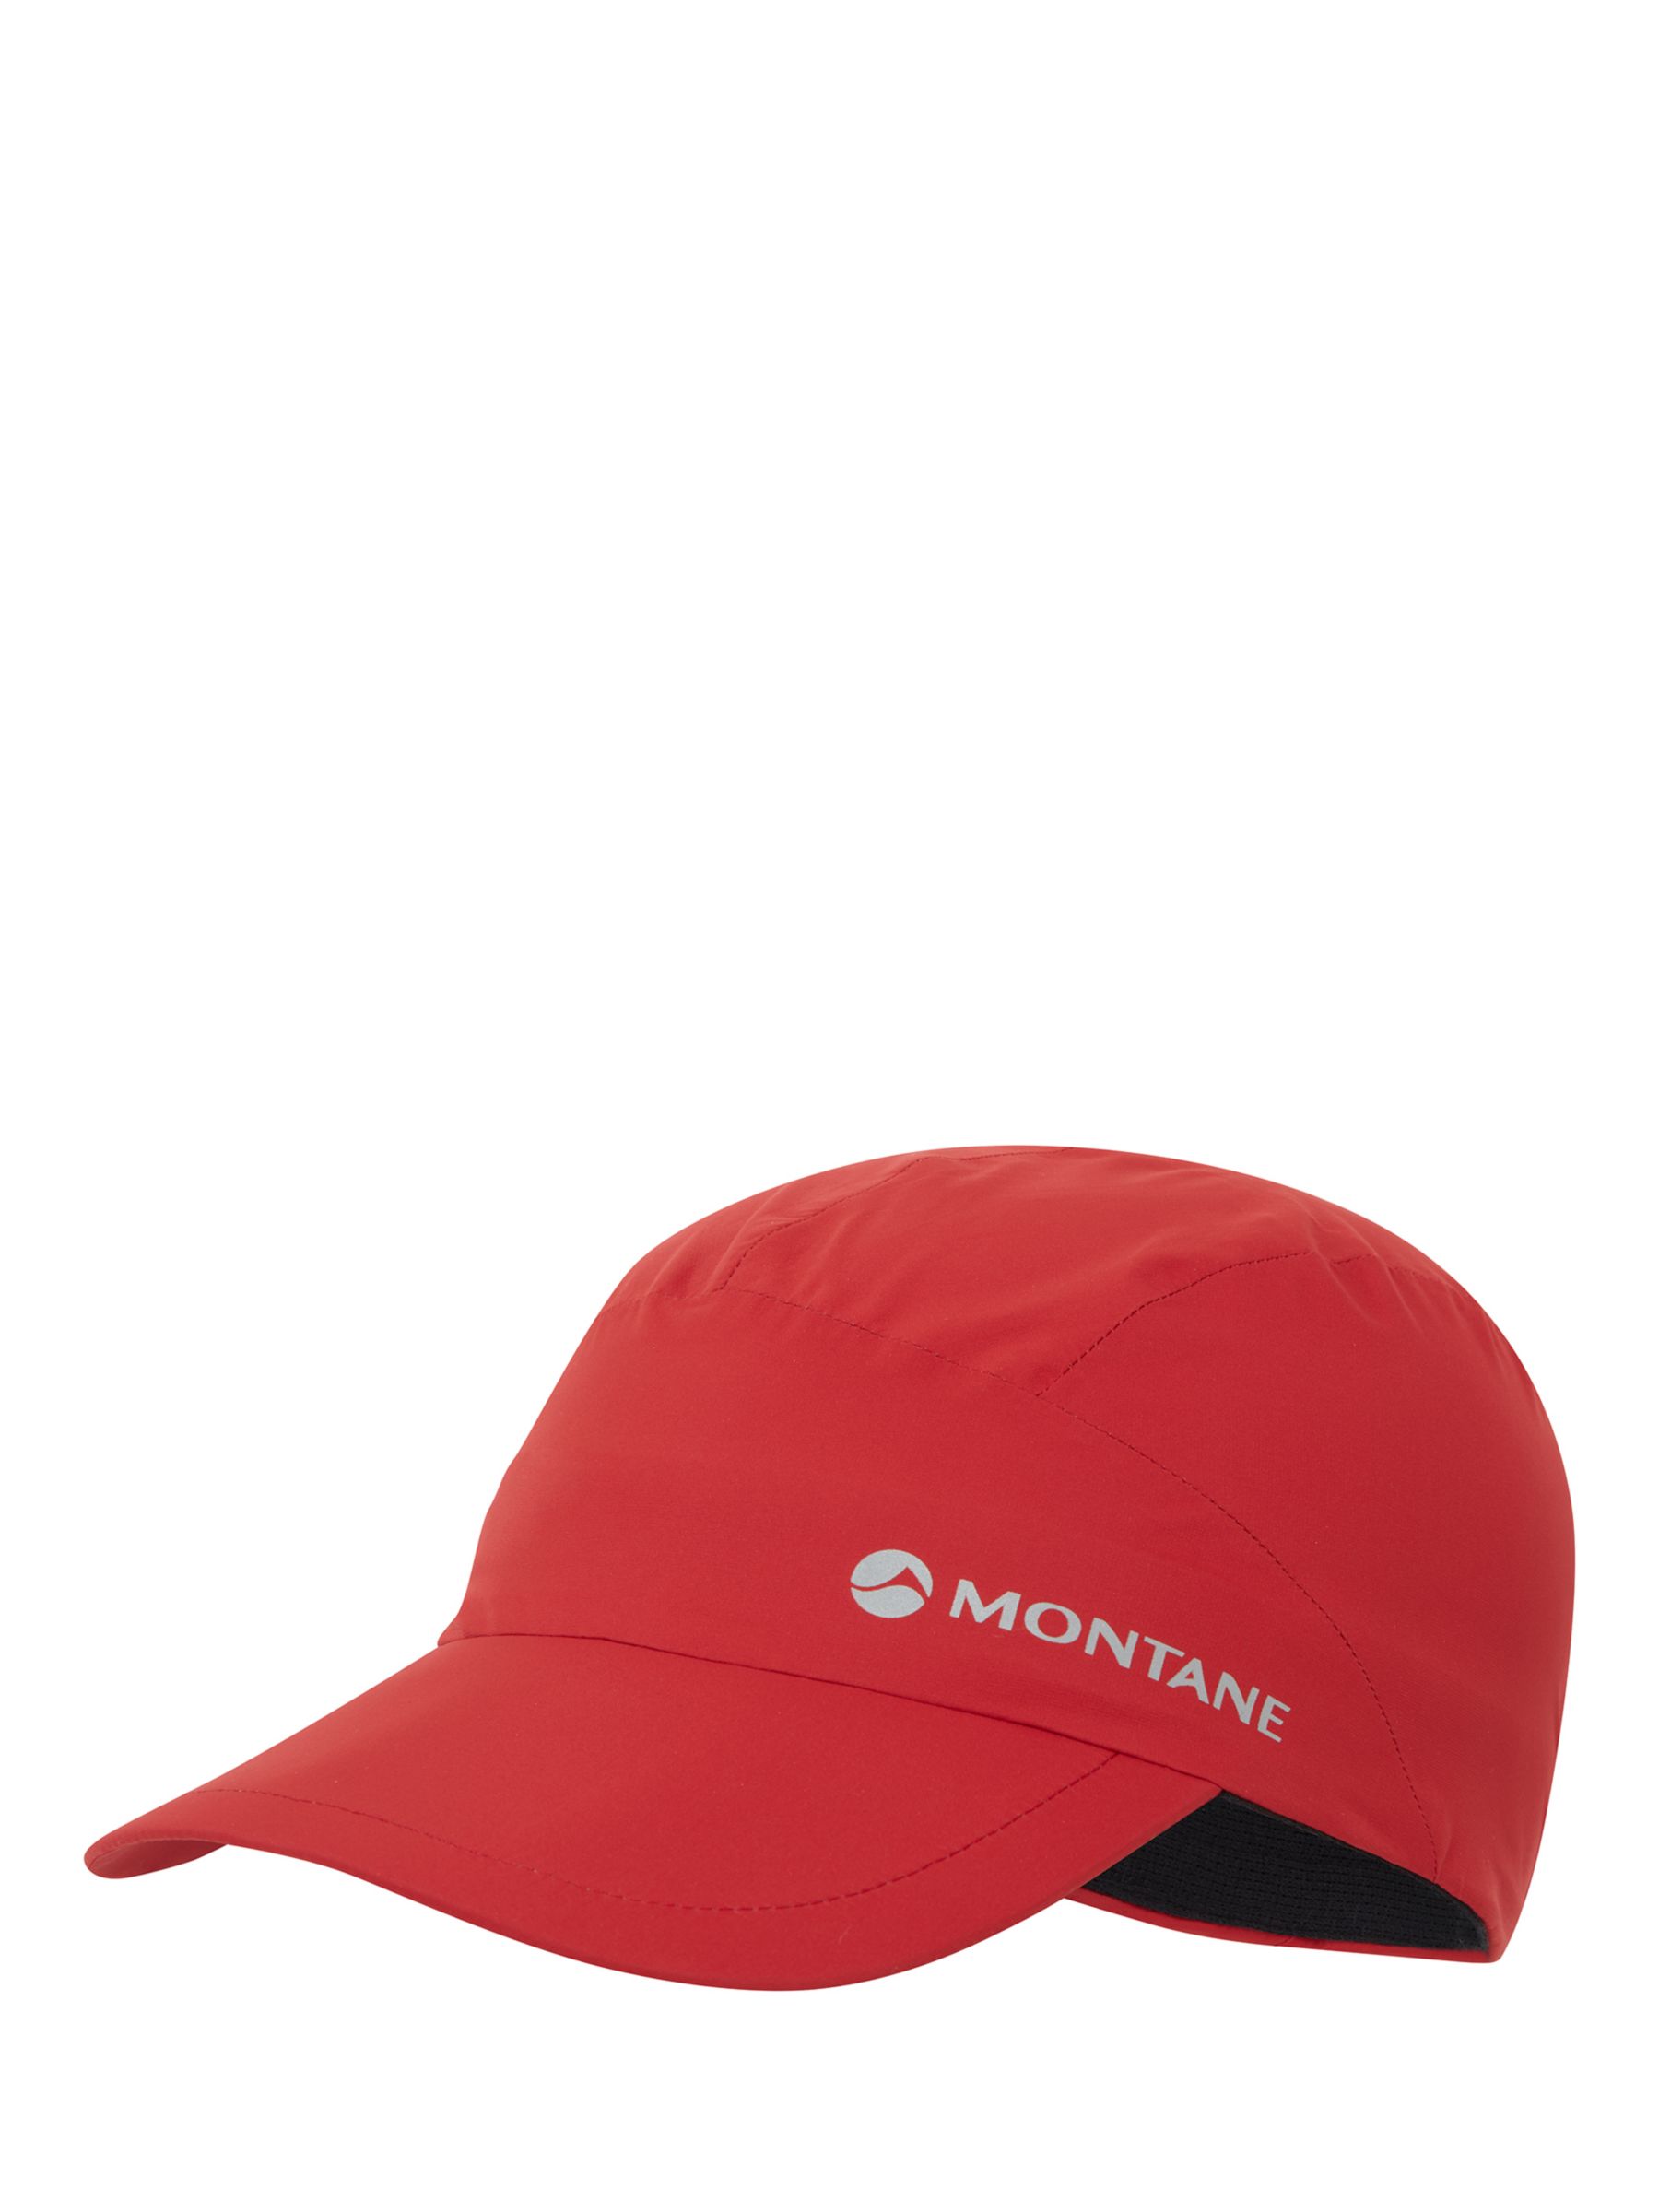 Montane Minimus Lite Waterproof Cap, Acer Red, One Size